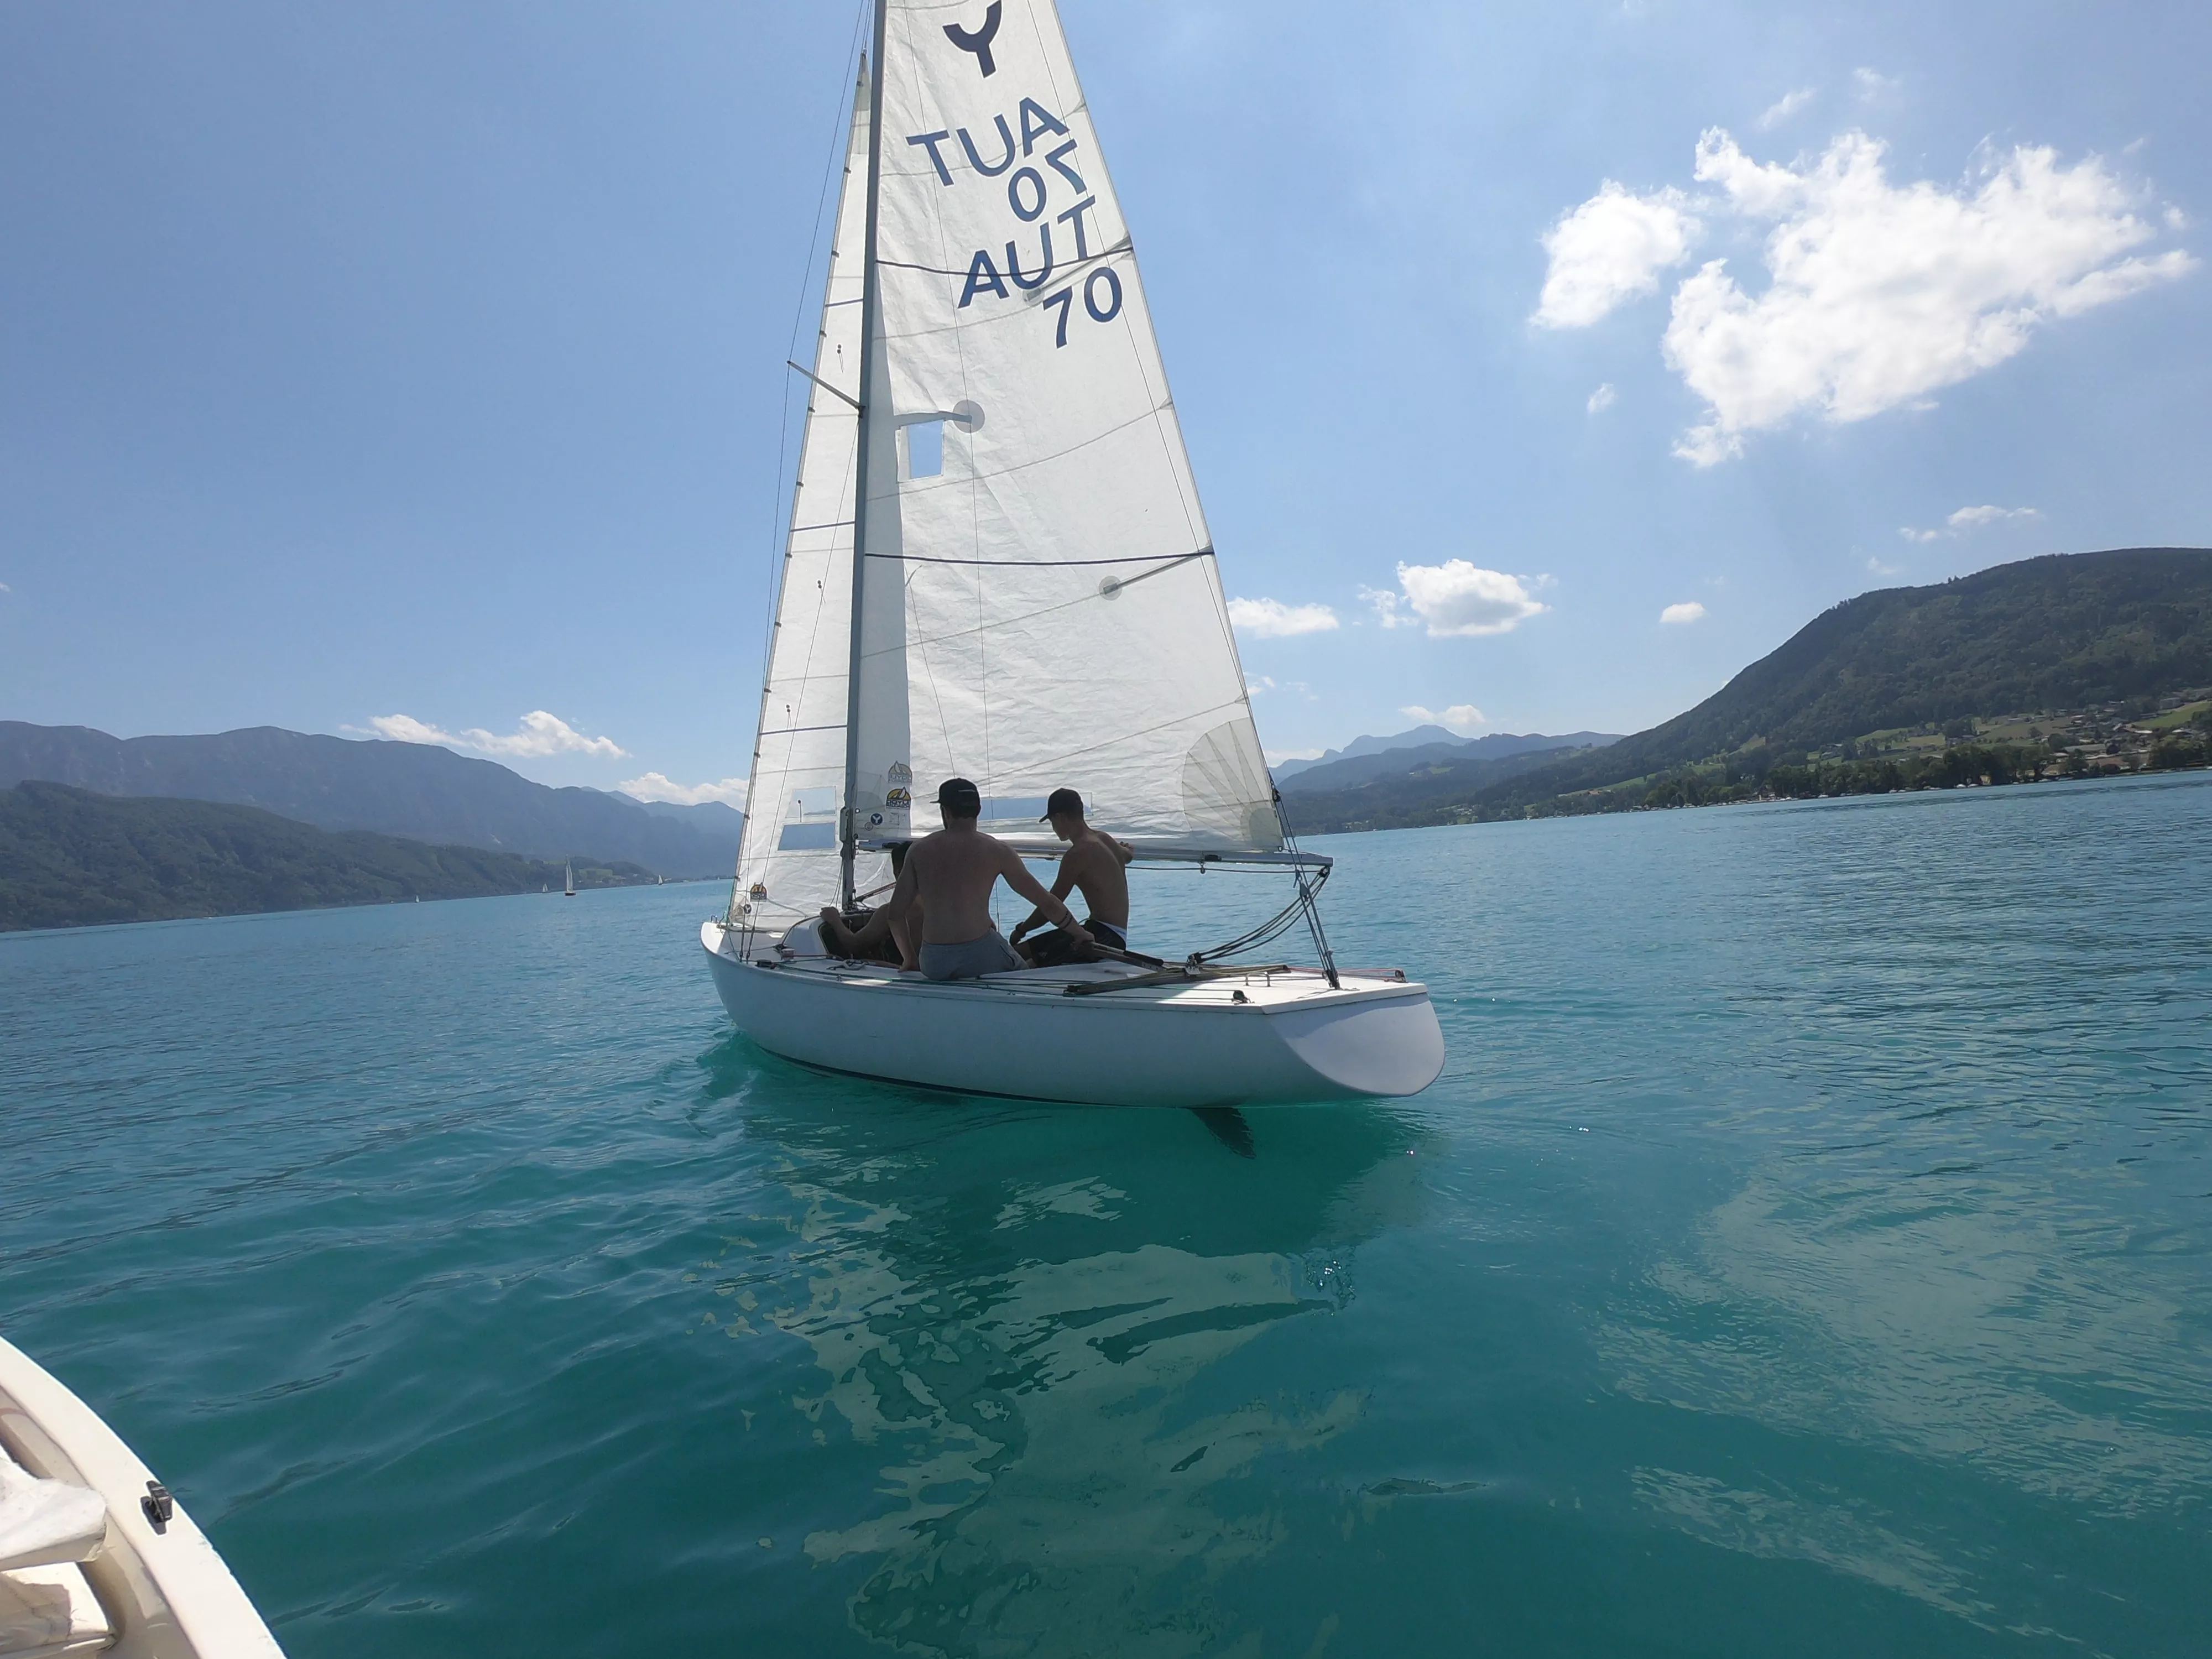 Sail and Yacht School Koller Nussdorf am Attersee in Austria, Europe | Yachting - Rated 0.7